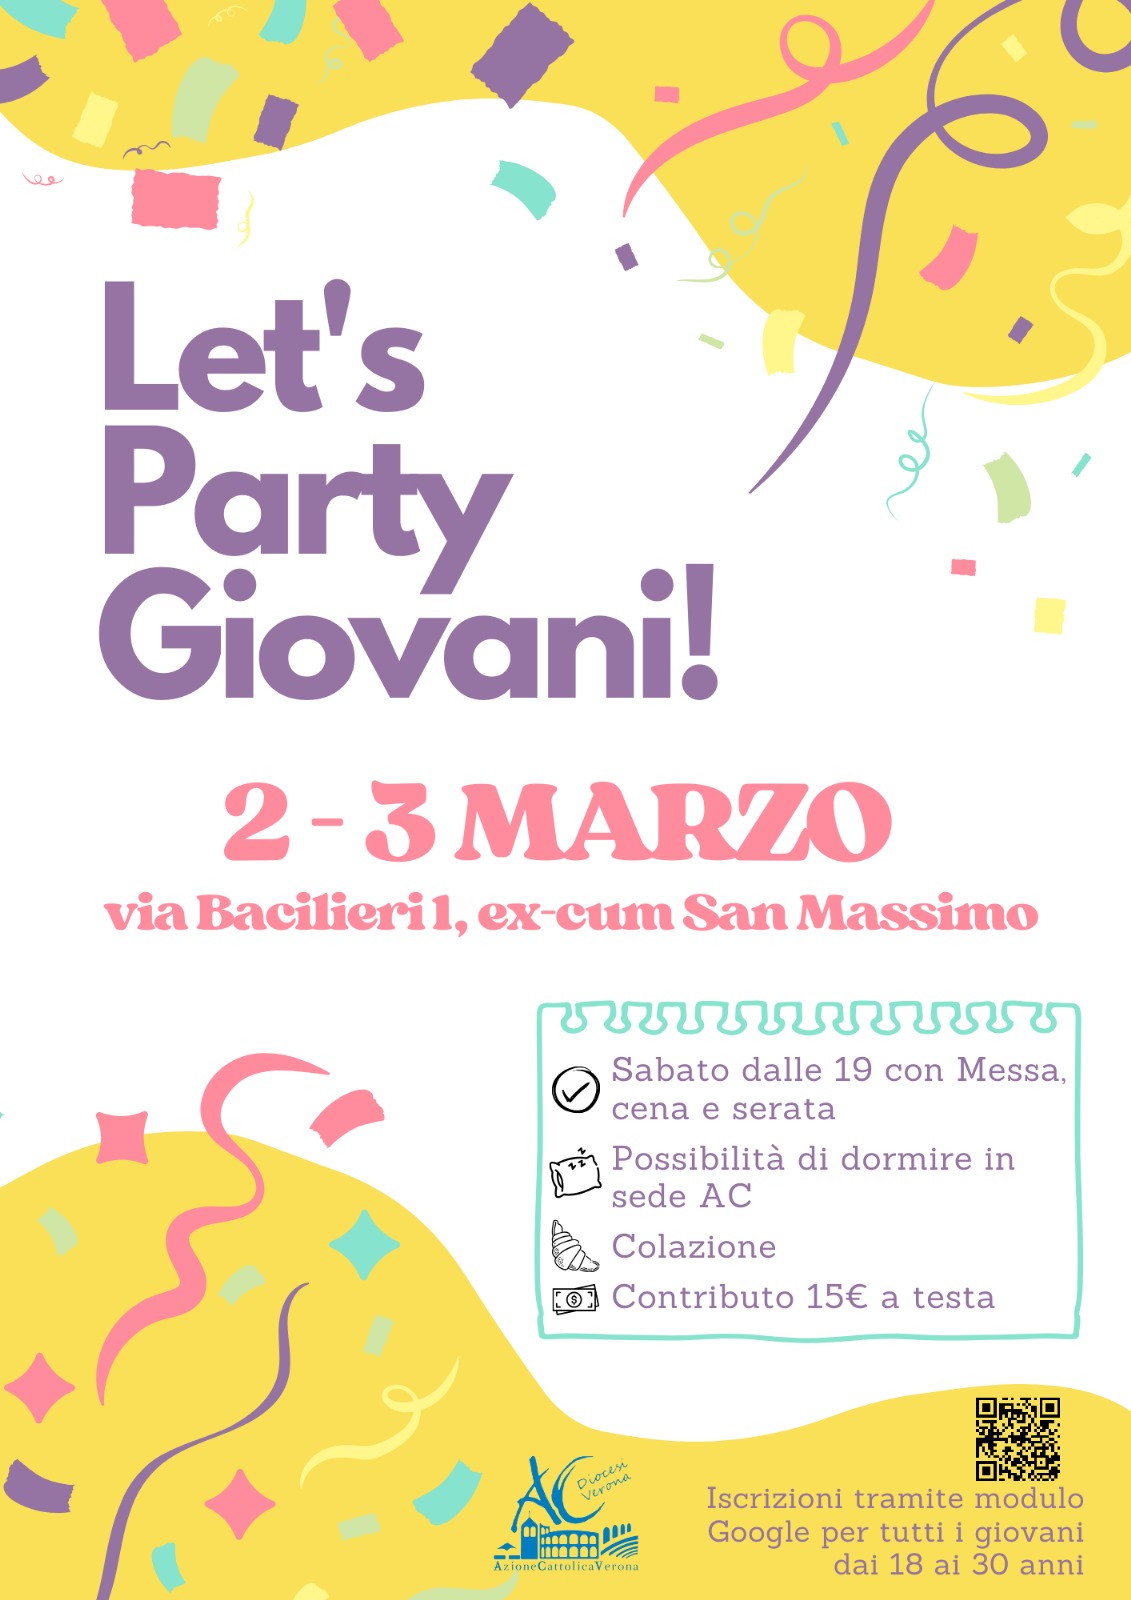 Let's Party Giovani